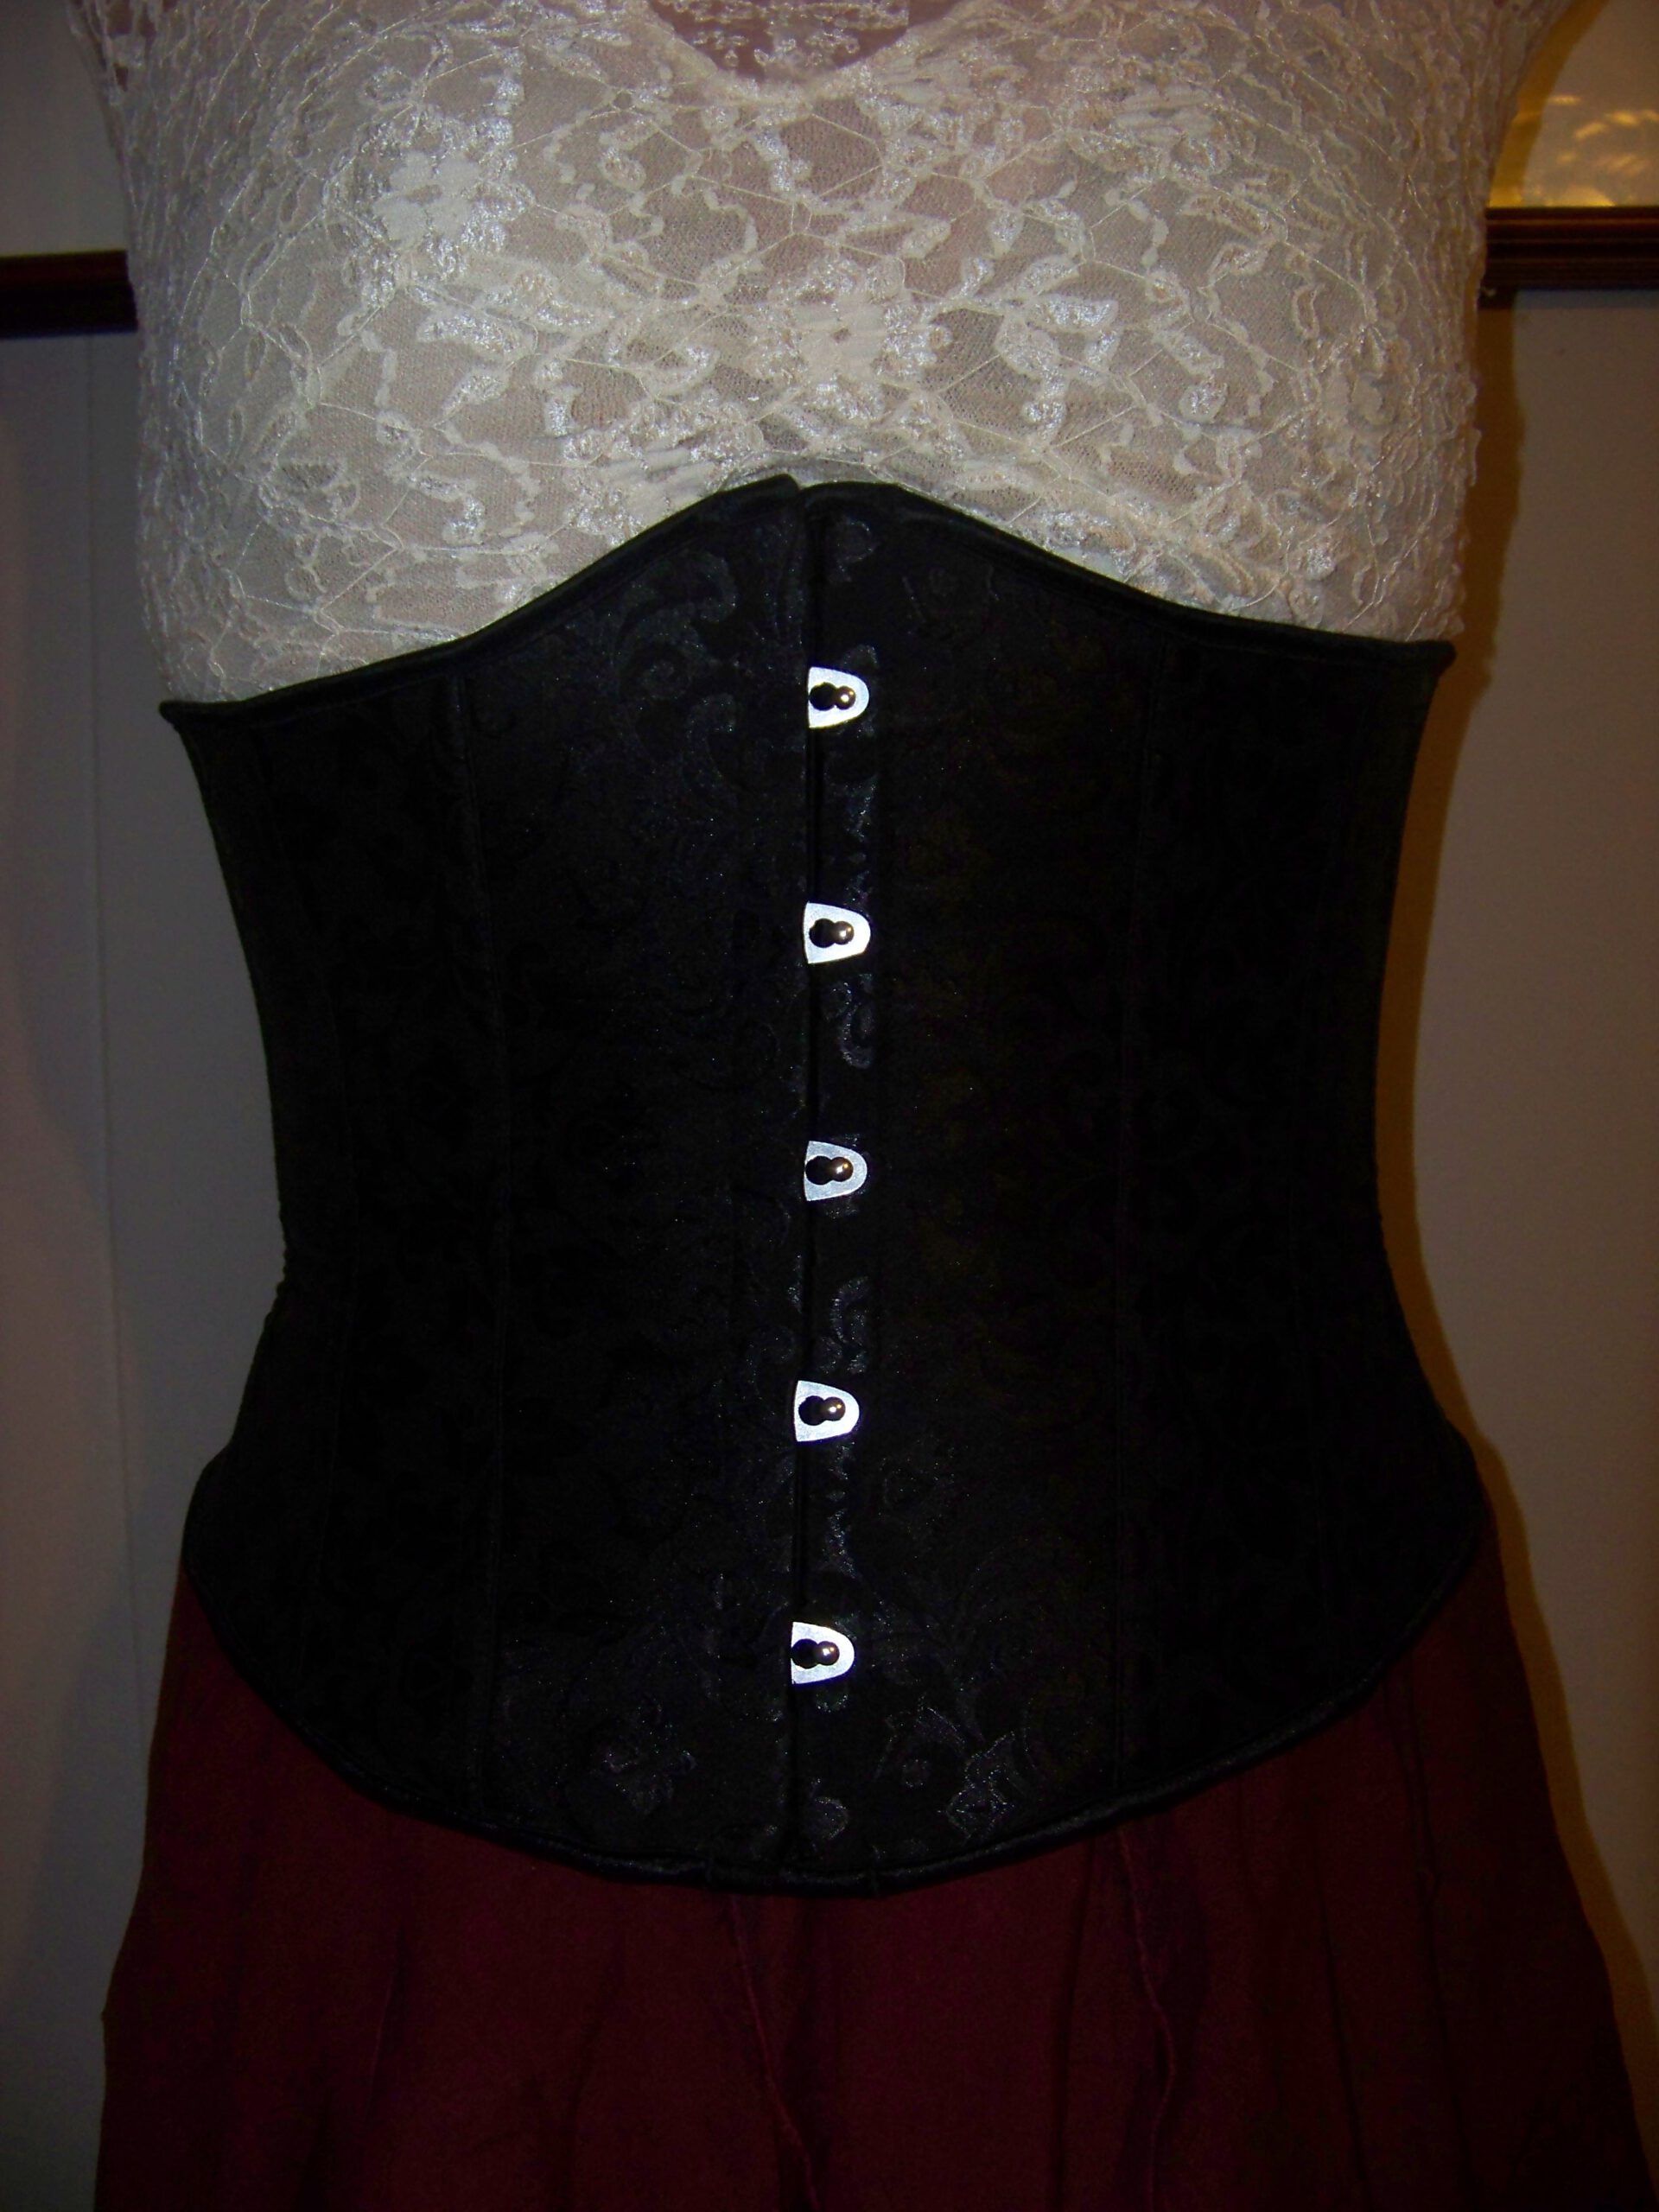 #BlogHer12 – Blogger Bash: Review and Sweepstakes – Corset Chick $30 value